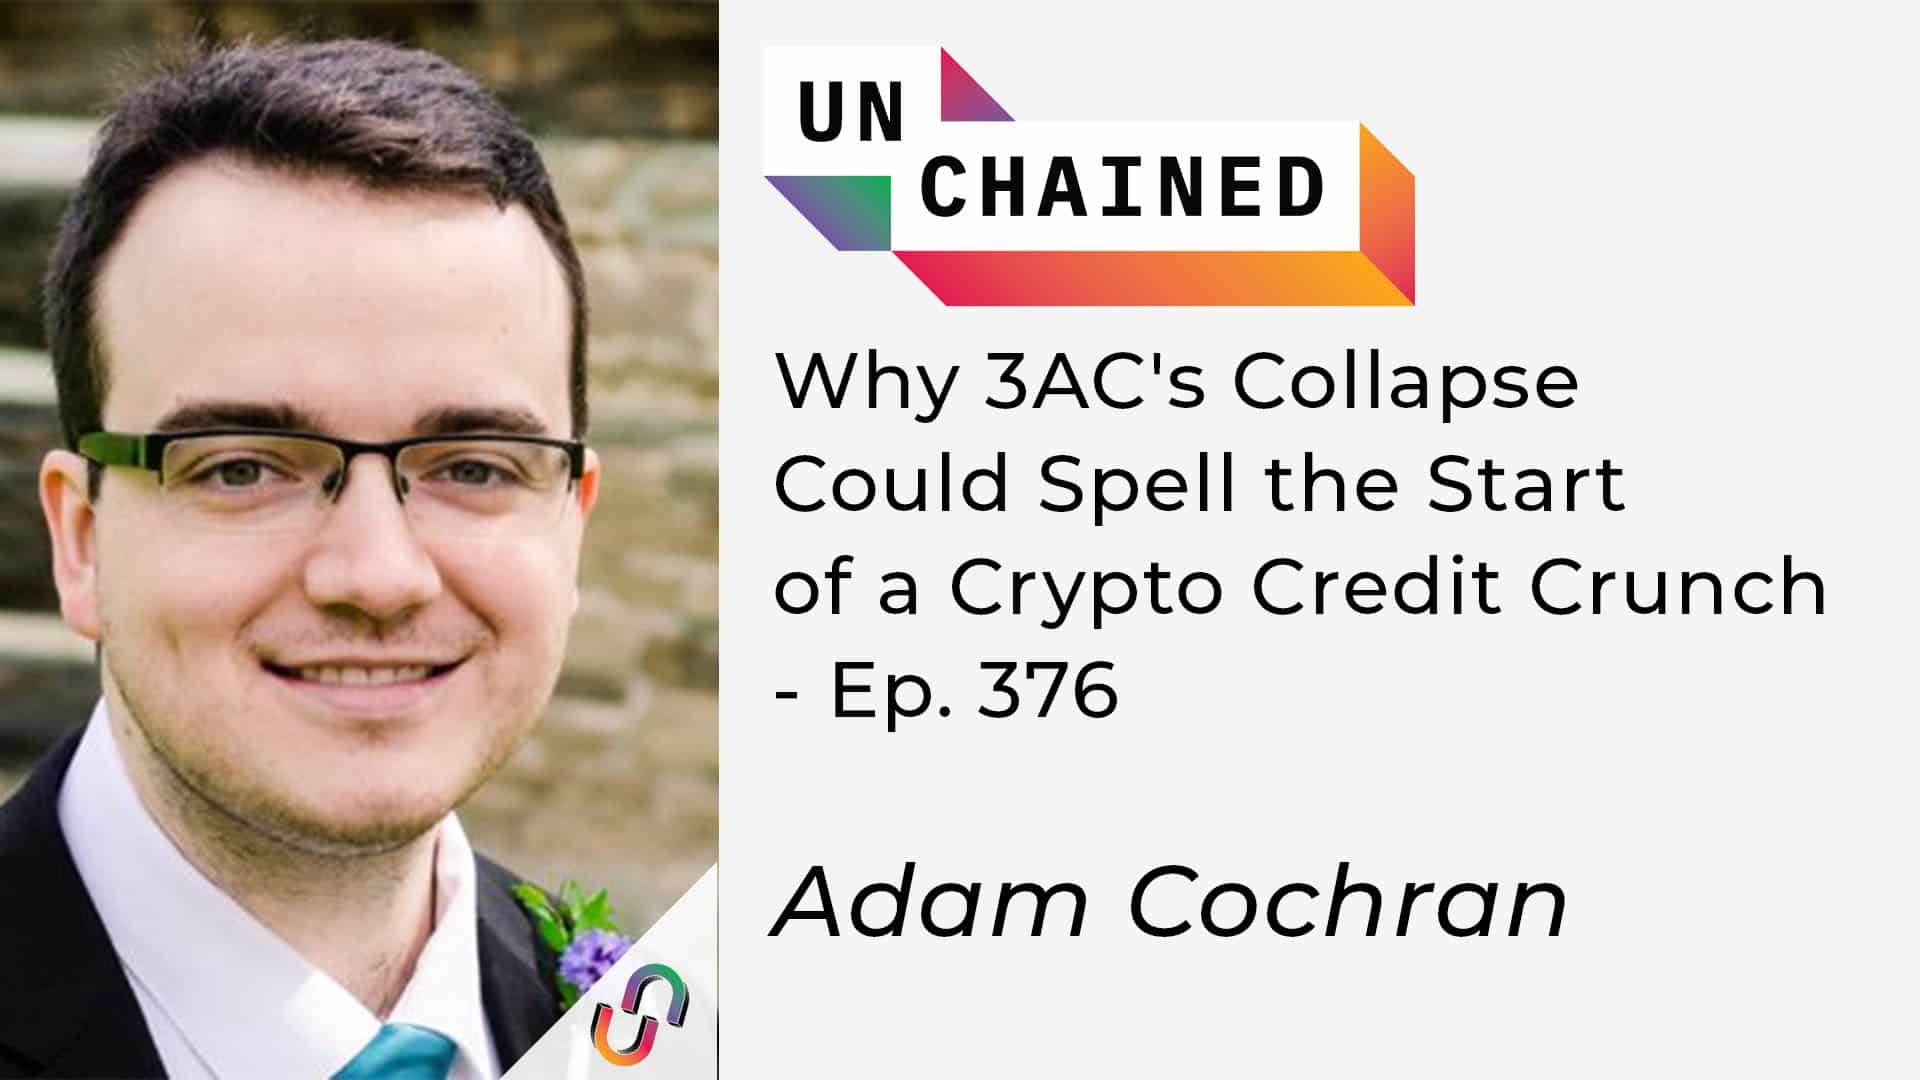 Why 3AC's Collapse Could Spell the Start of a Crypto Credit Crunch - Ep. 376